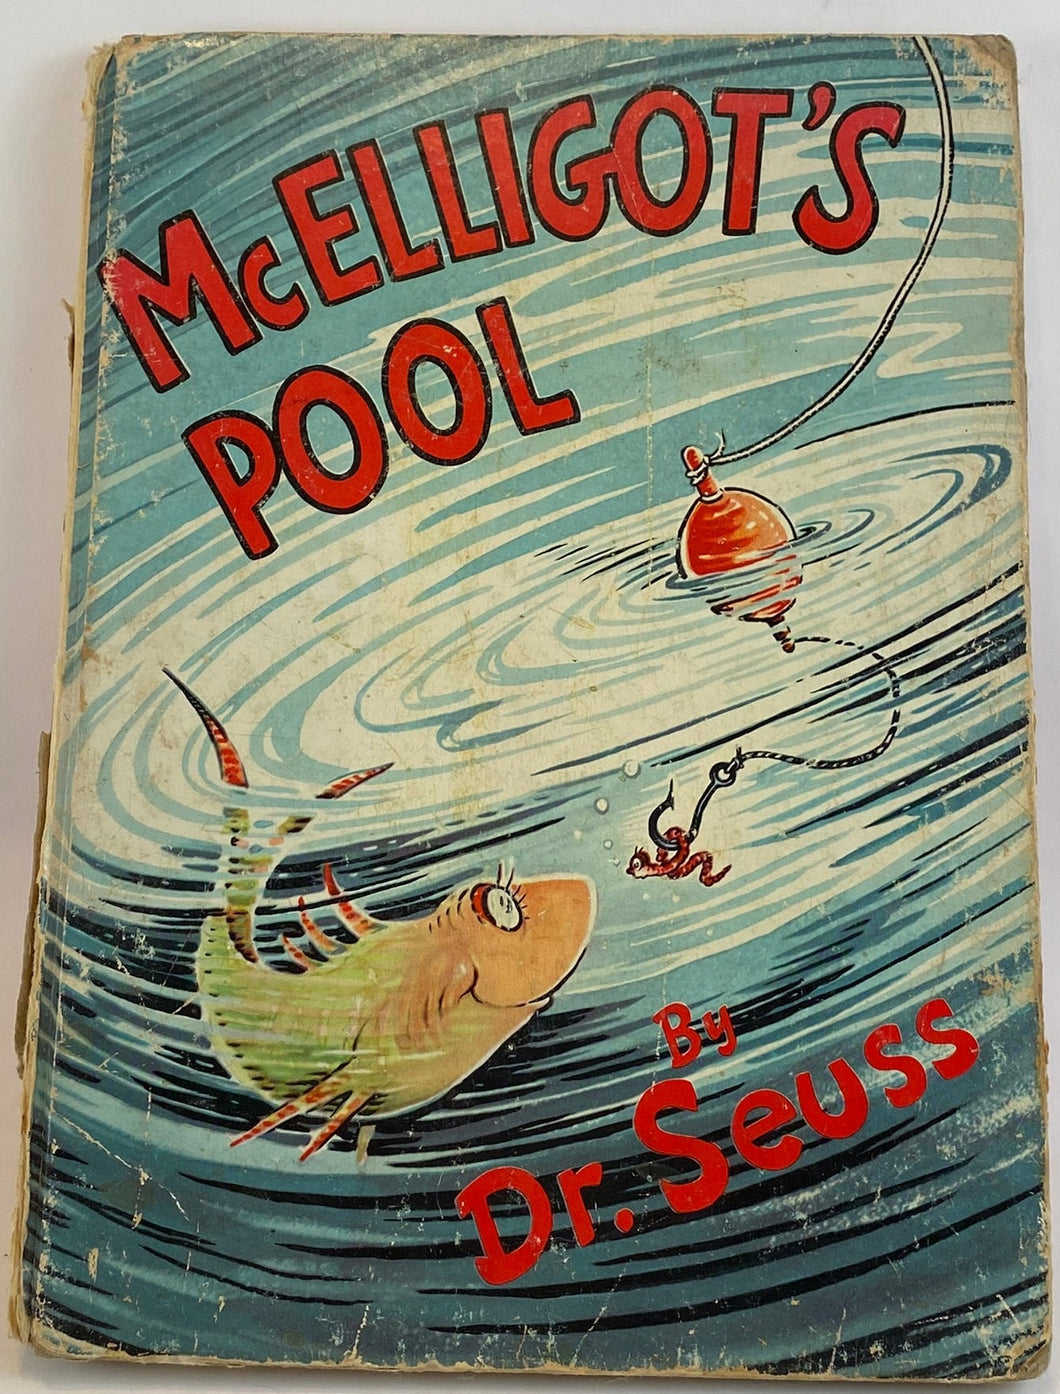 Cover of McElligot's Pool book by Dr. Seuss with a fish in the ocean and a worm on the hook